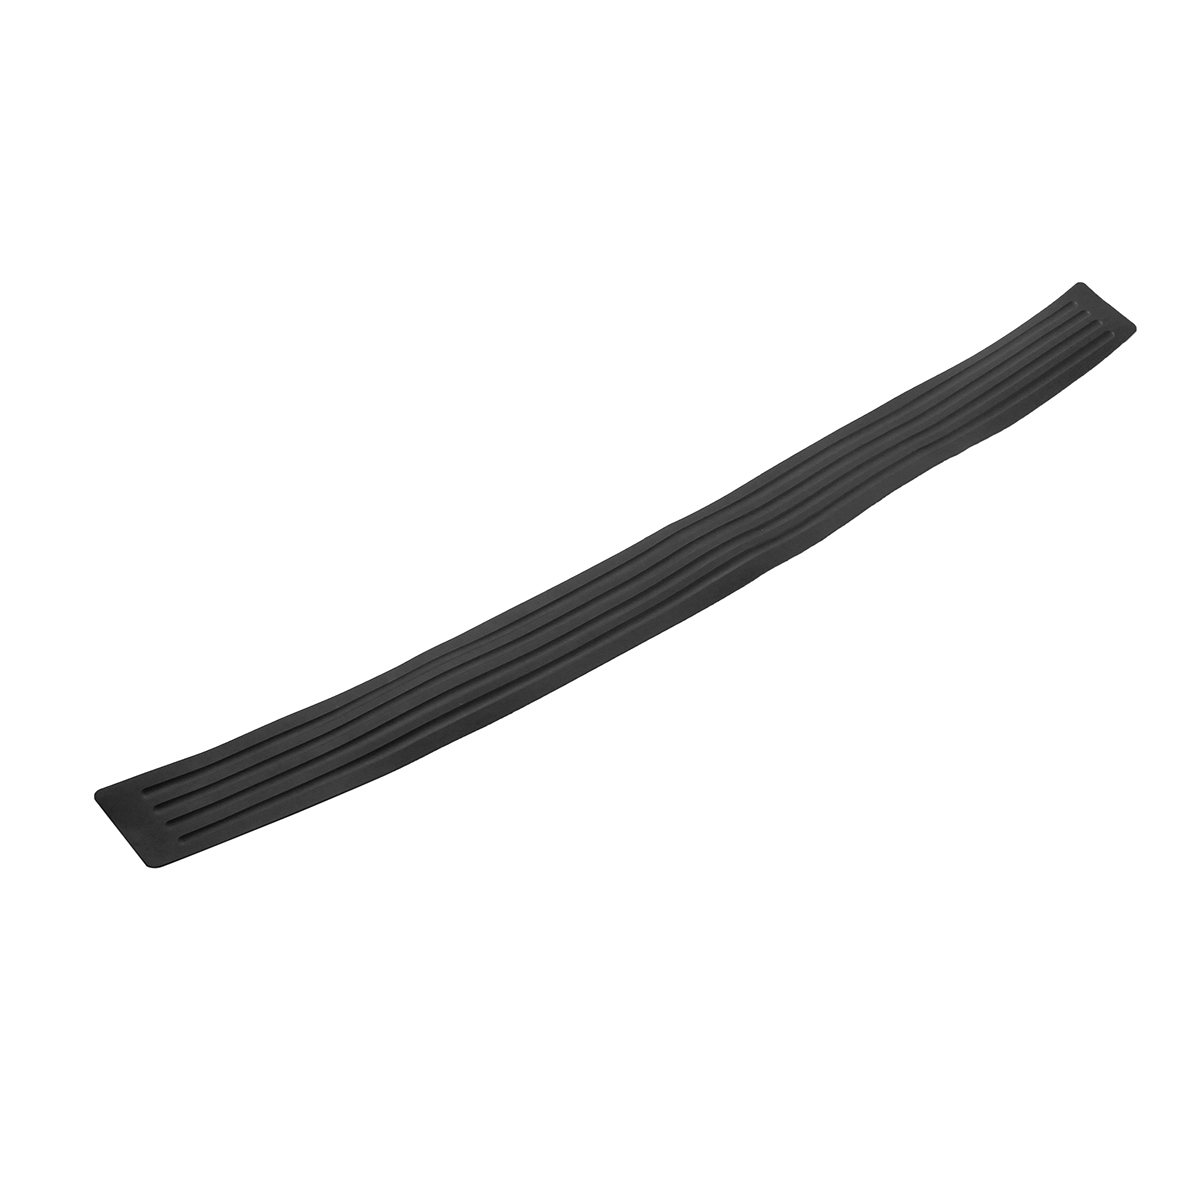 104cm-PVC-Rubber-Rear-Bumper-Sill-Protector-Plate-Cover-Guard-Pad-Moulding-for-VWAudiBMW-SUV-1364765